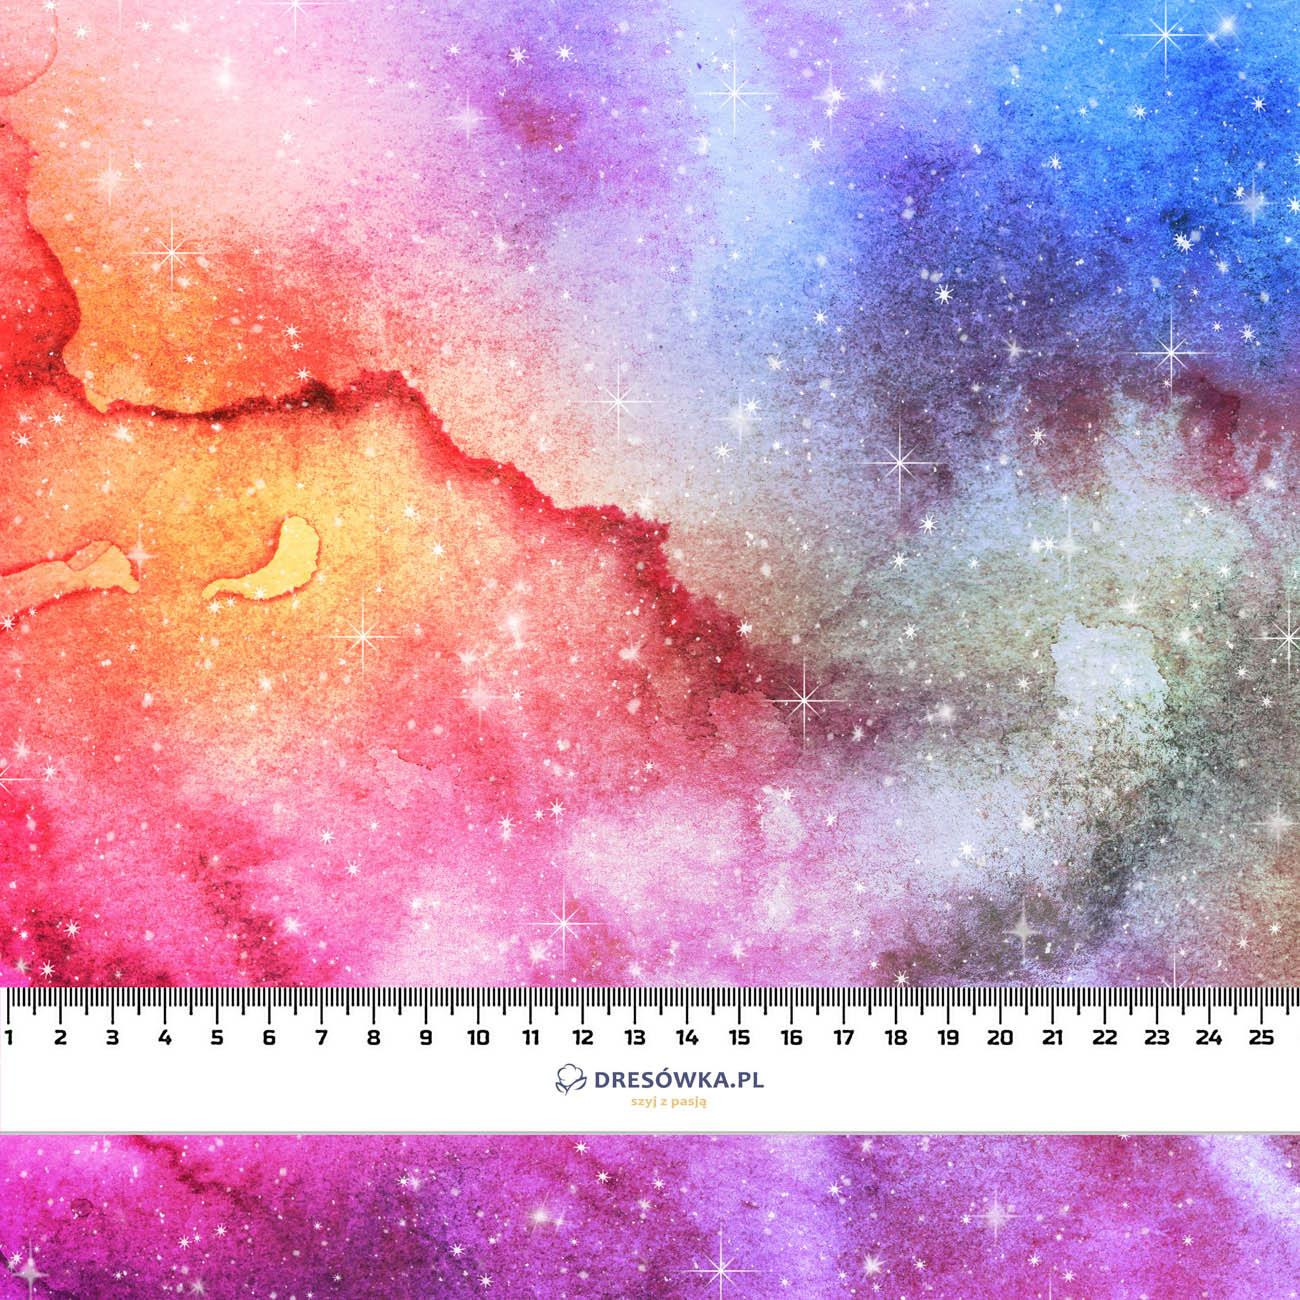 WATERCOLOR GALAXY PAT. 4 - brushed knit fabric with teddy / alpine fleece